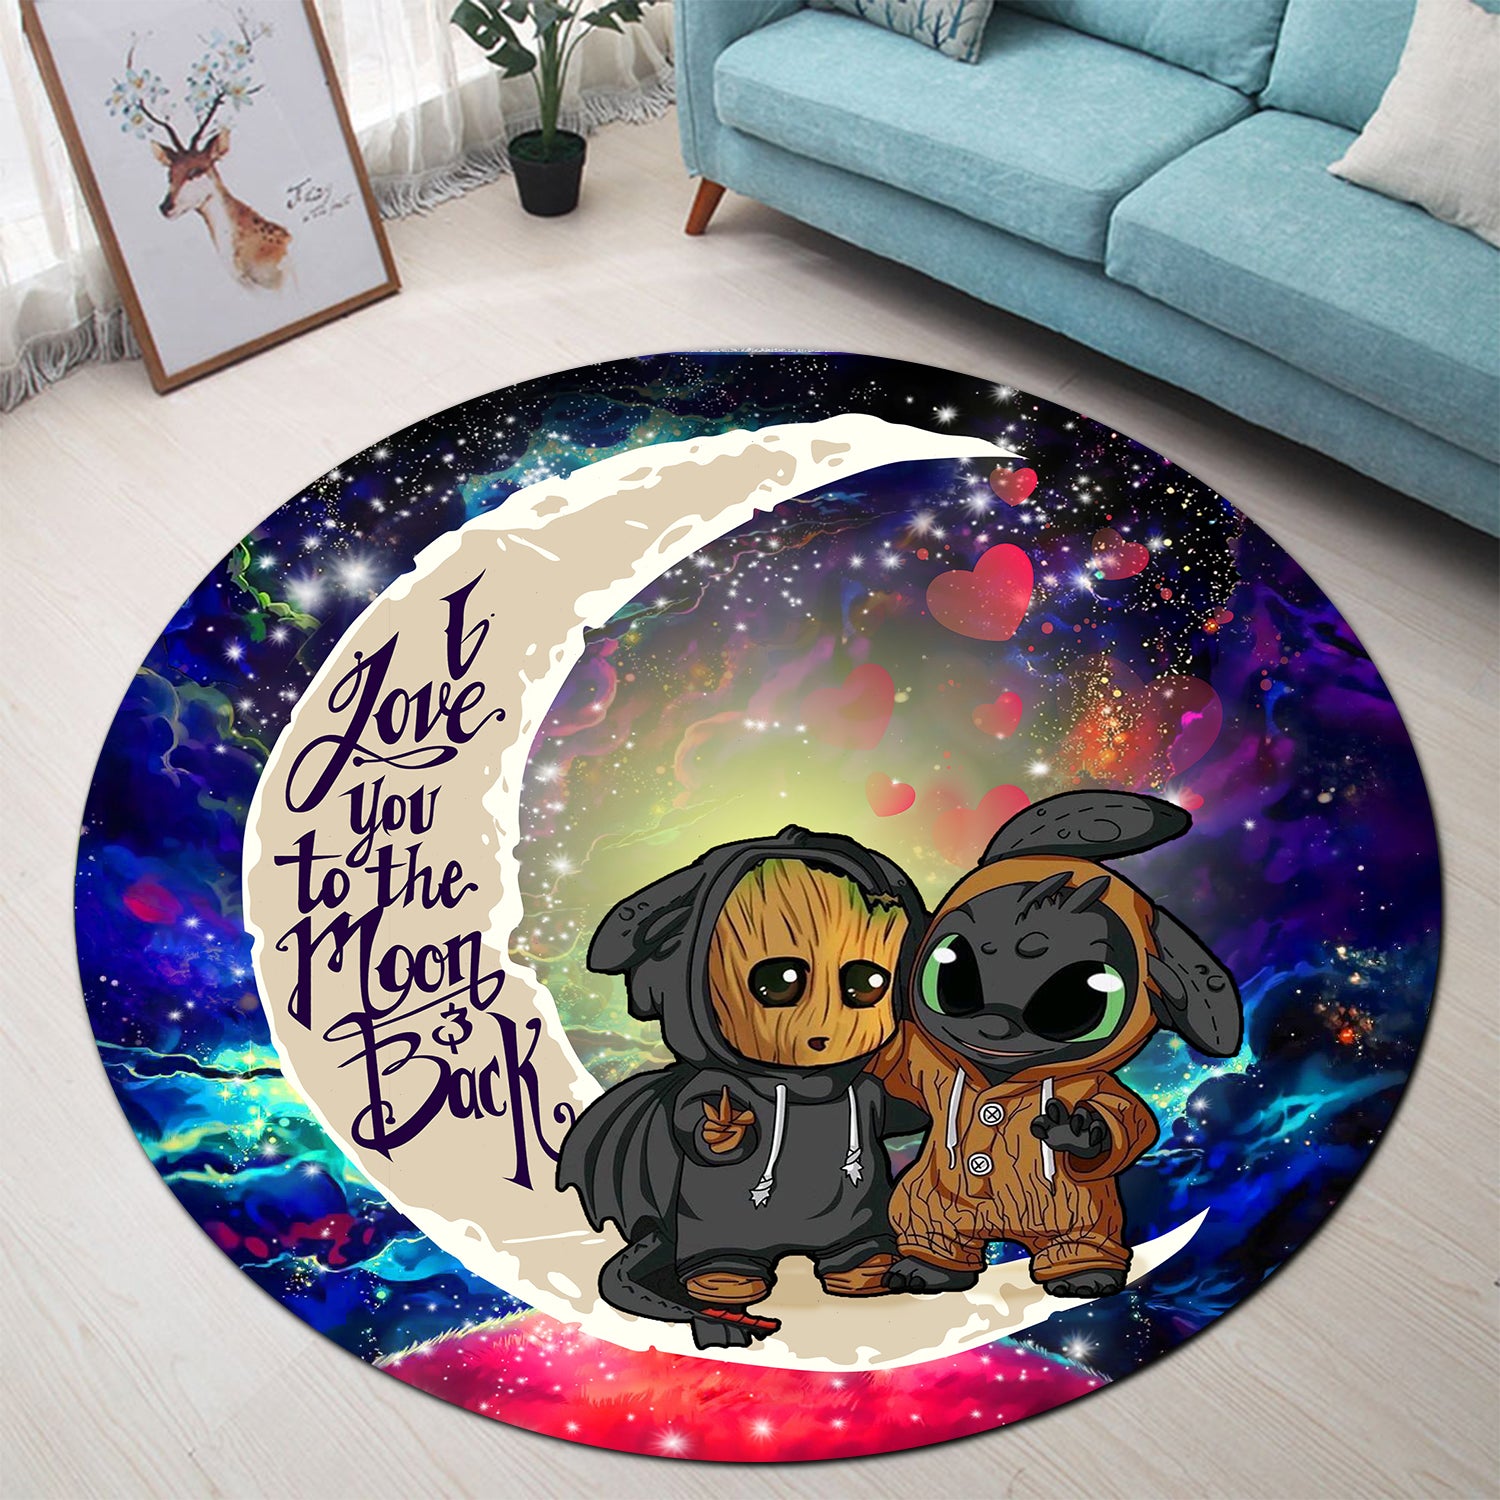 Groot And Toothless Love You To The Moon Galaxy Round Carpet Rug Bedroom Livingroom Home Decor Nearkii